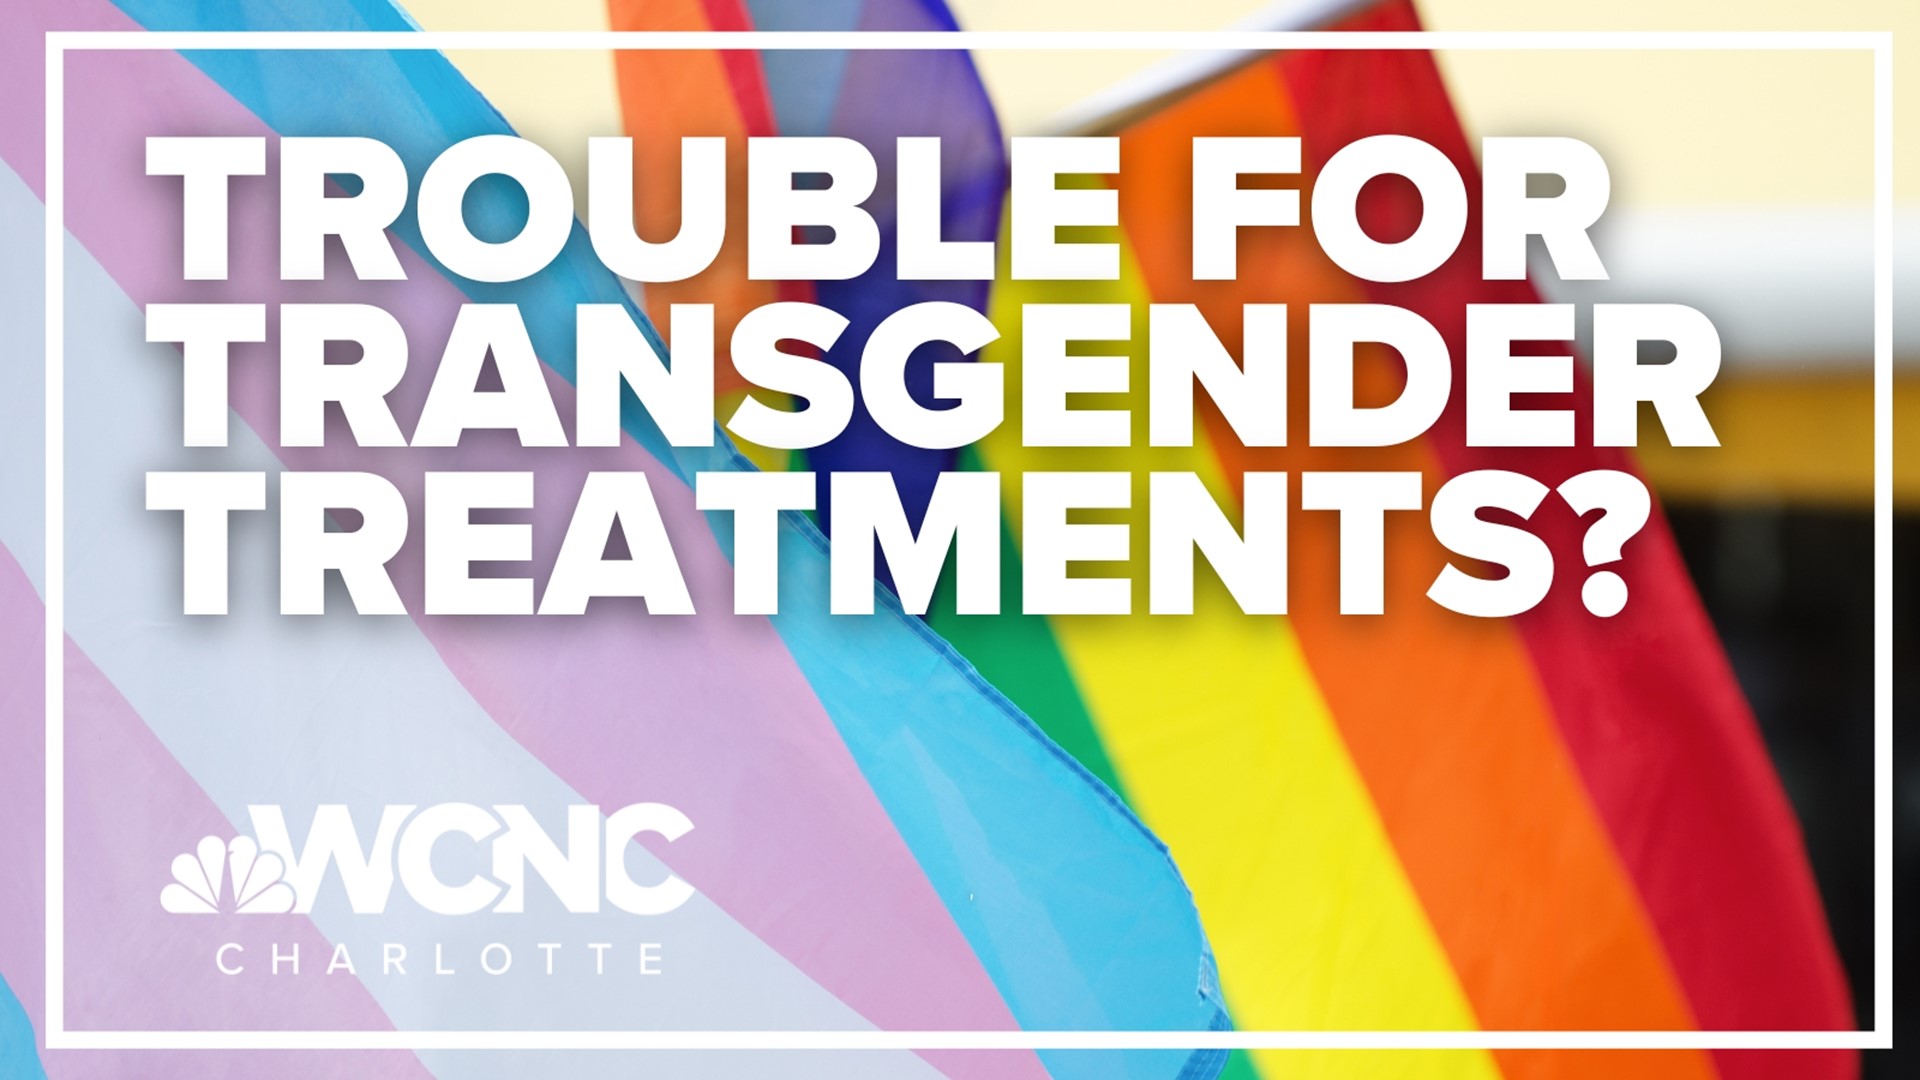 North Carolina could be the latest state to block transgender kids from receiving certain treatments.